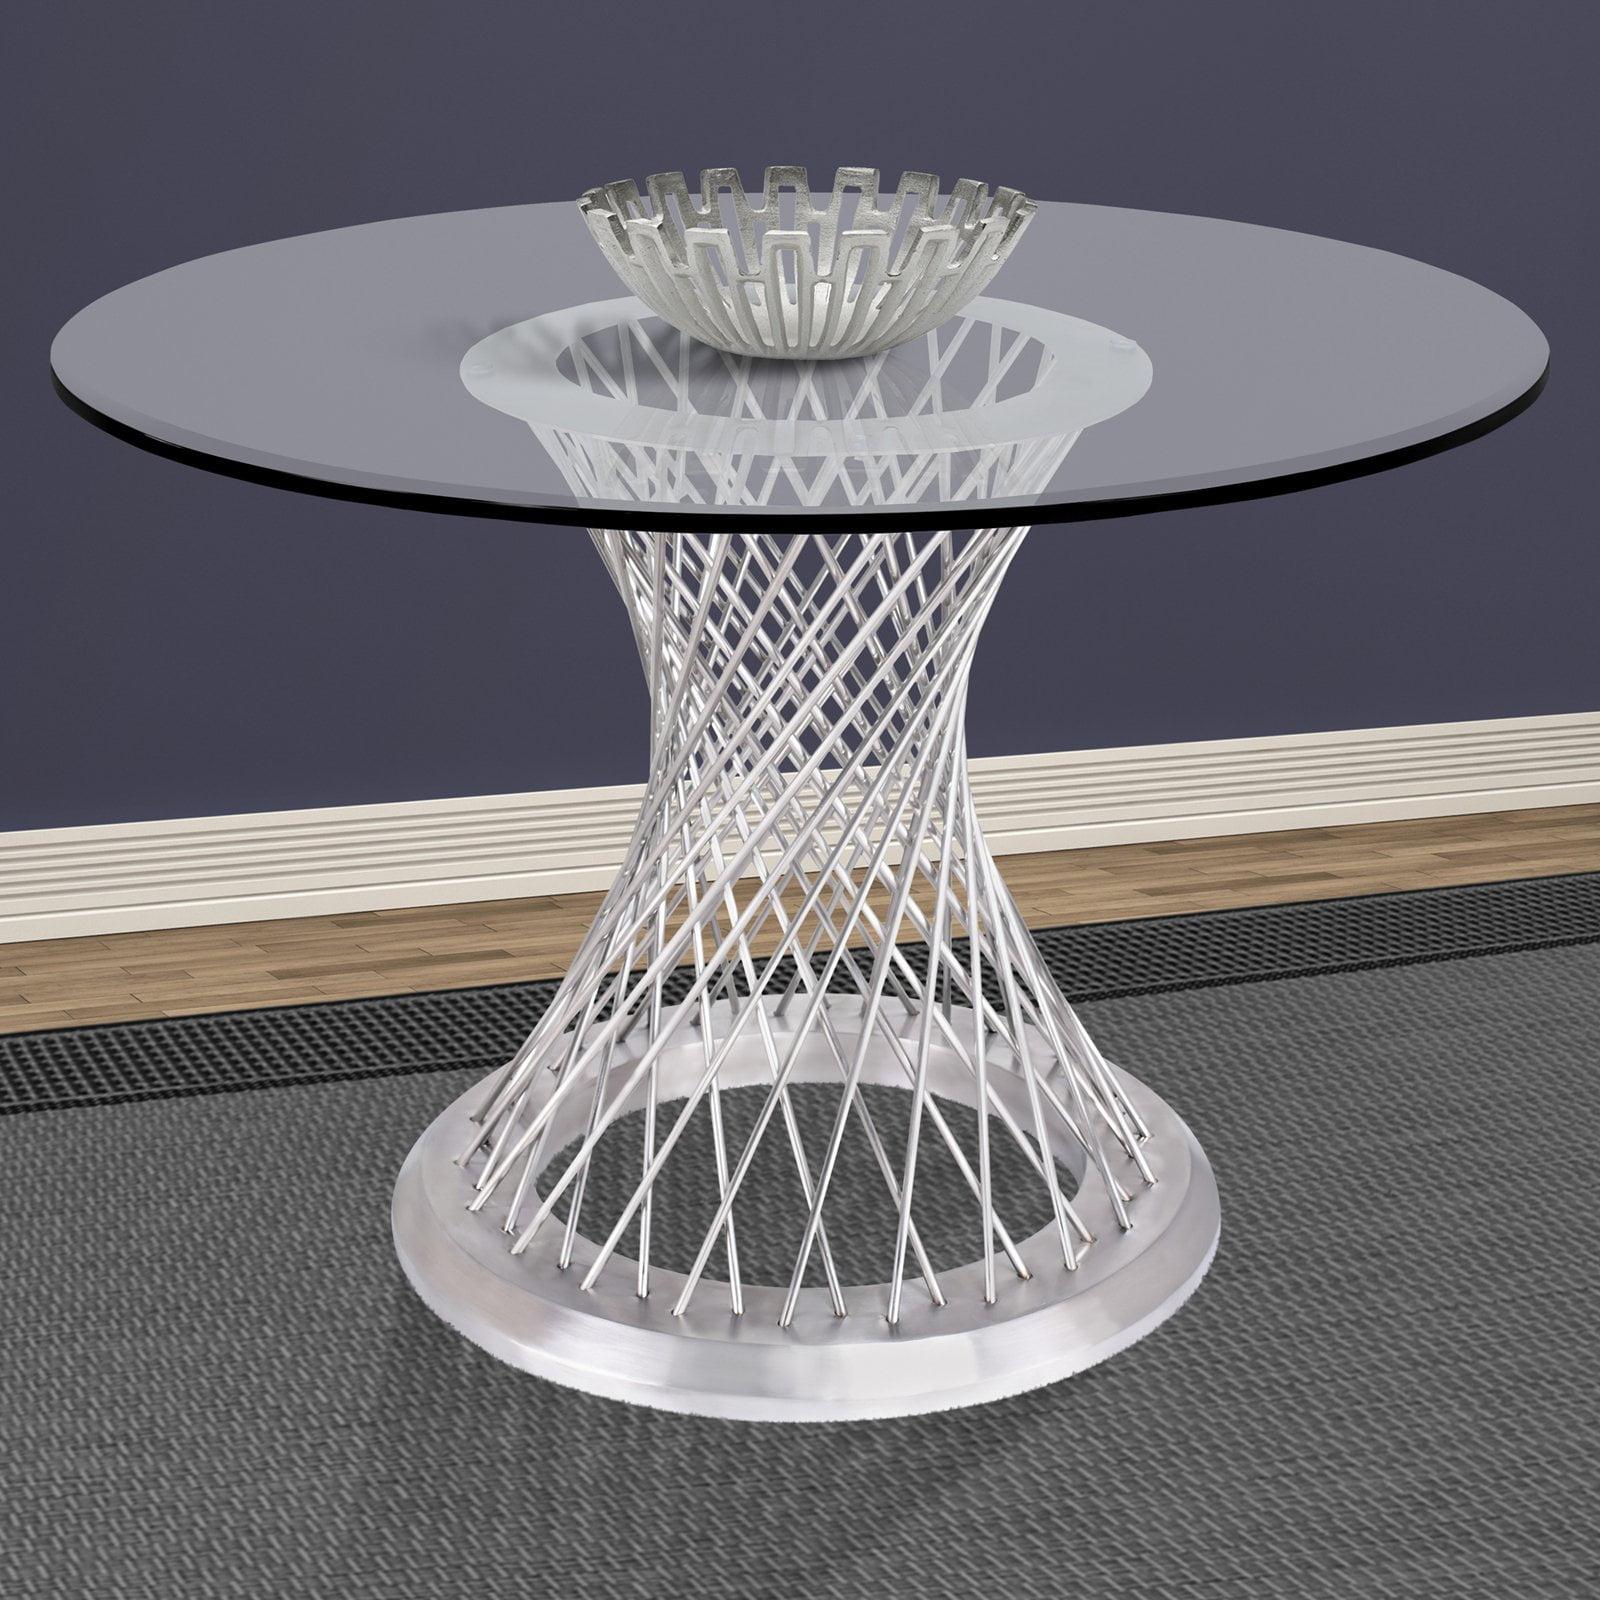 48" Round Chrome and Glass Contemporary Dining Table